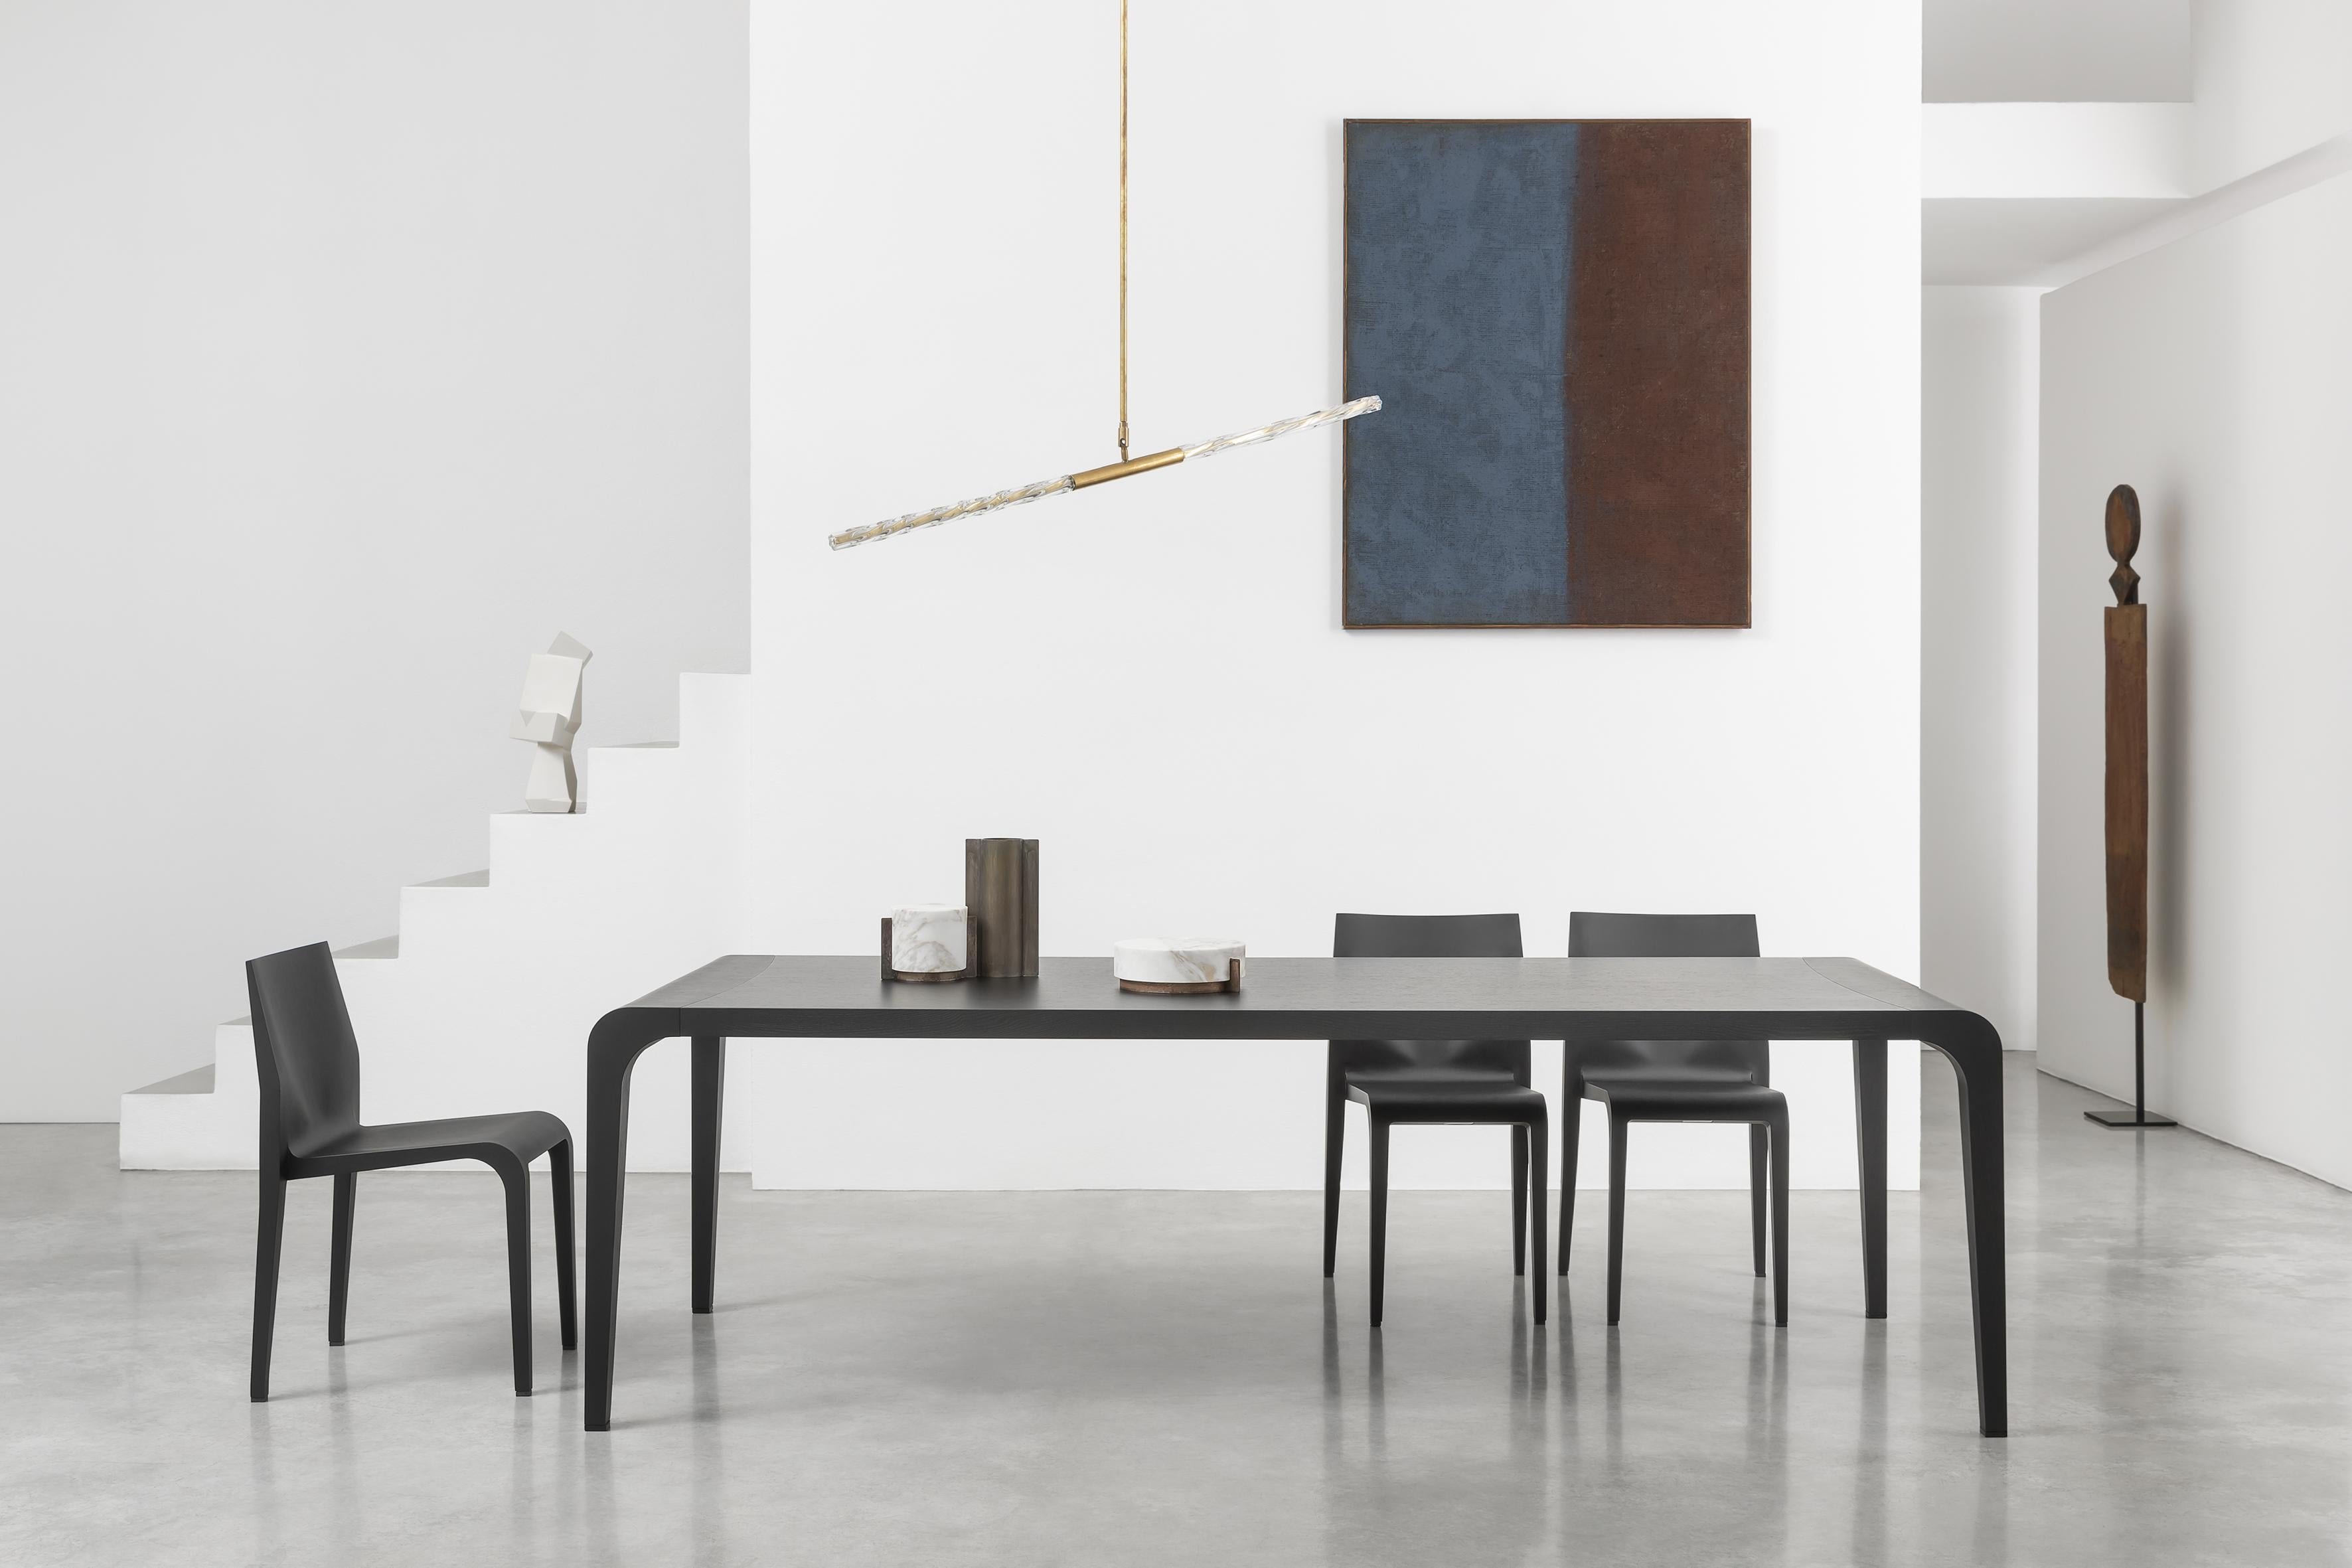 Alias Medium 390 Ilvolo Table in Oak Canaletto Walnut Wood Top and Frame by Riccardo Blumer

Table with structure in solid wood maple or ash. Maple veneer or oak veneer. Internal leg support in injected polyurethane foam. Finish in transparent